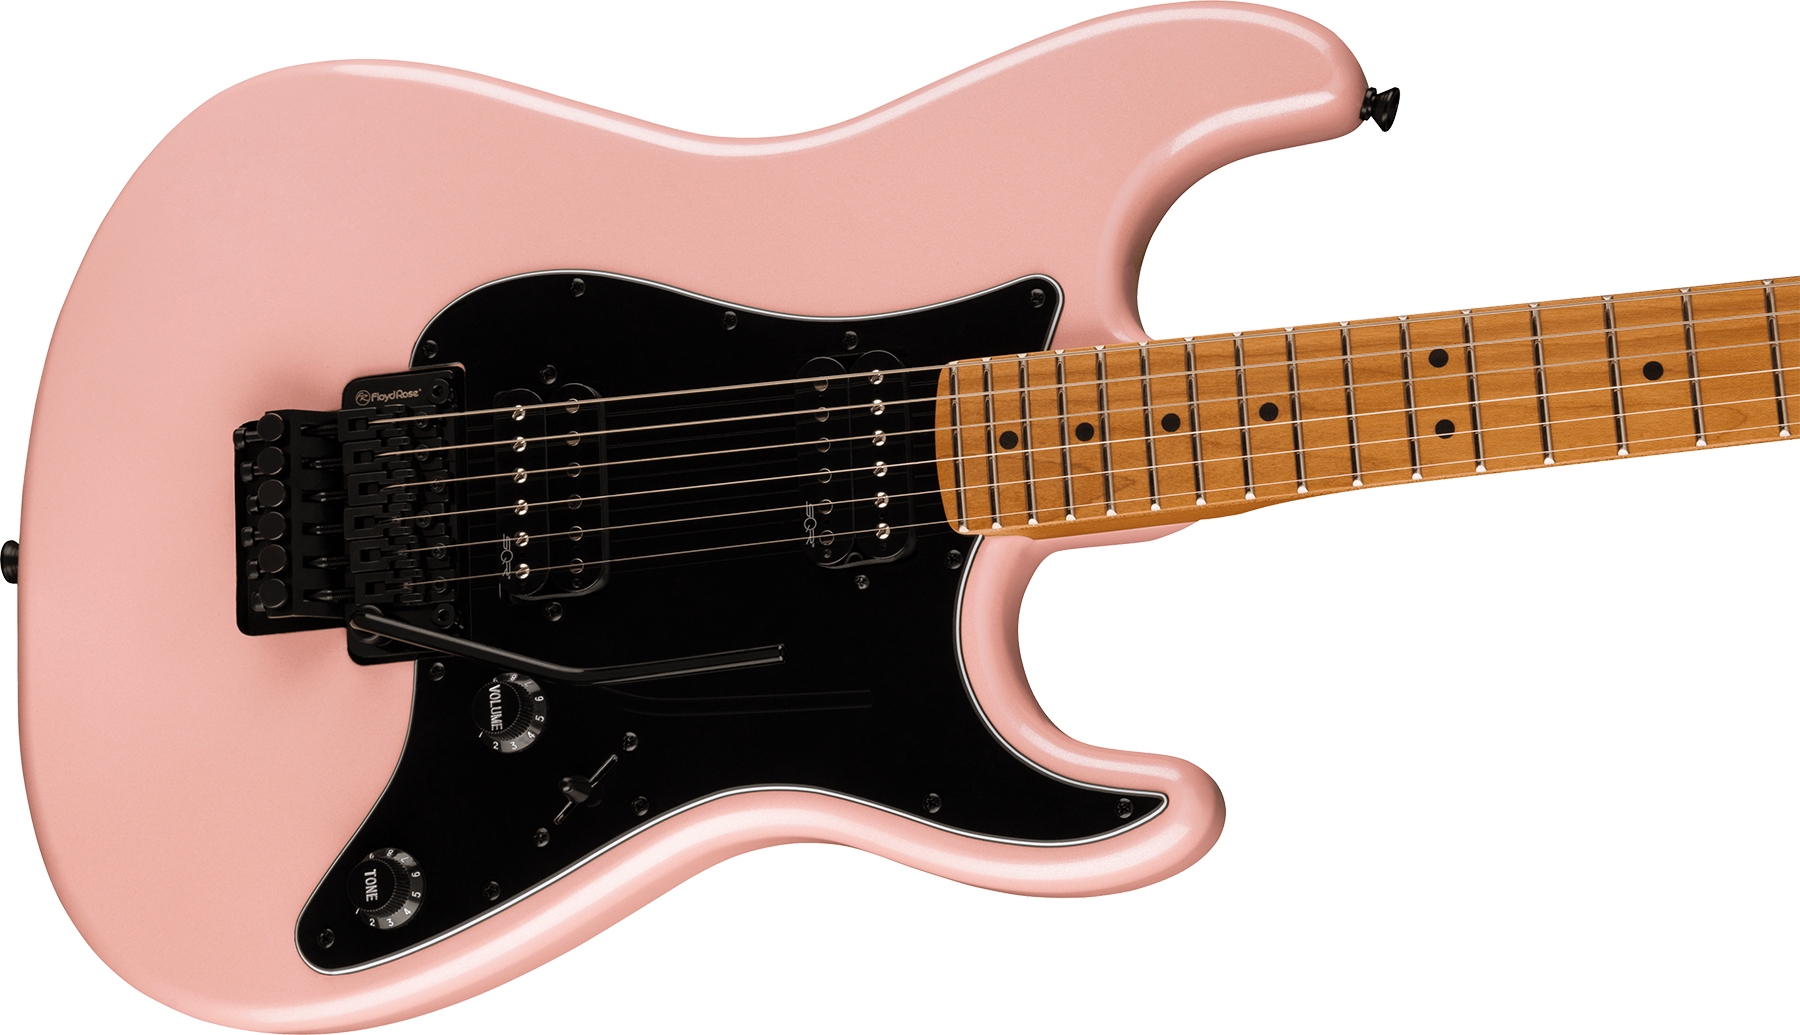 Squier Strat Contemporary Hh Fr Mn - Shell Pink Pearl - Guitare Électrique Forme Str - Variation 2